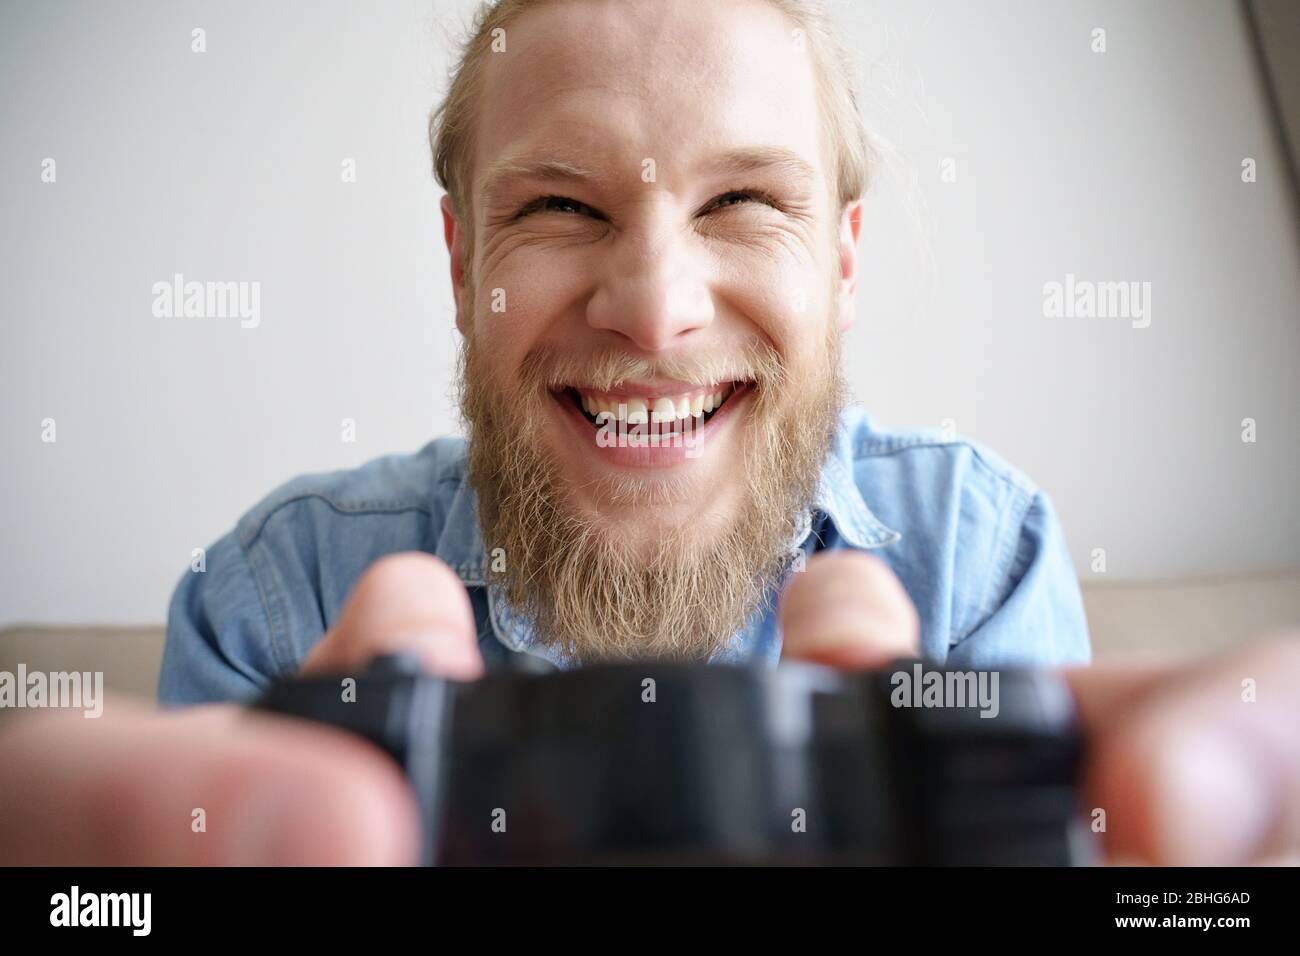 Funny happy young gamer holding joystick playing video game. Closeup. Stock Photo